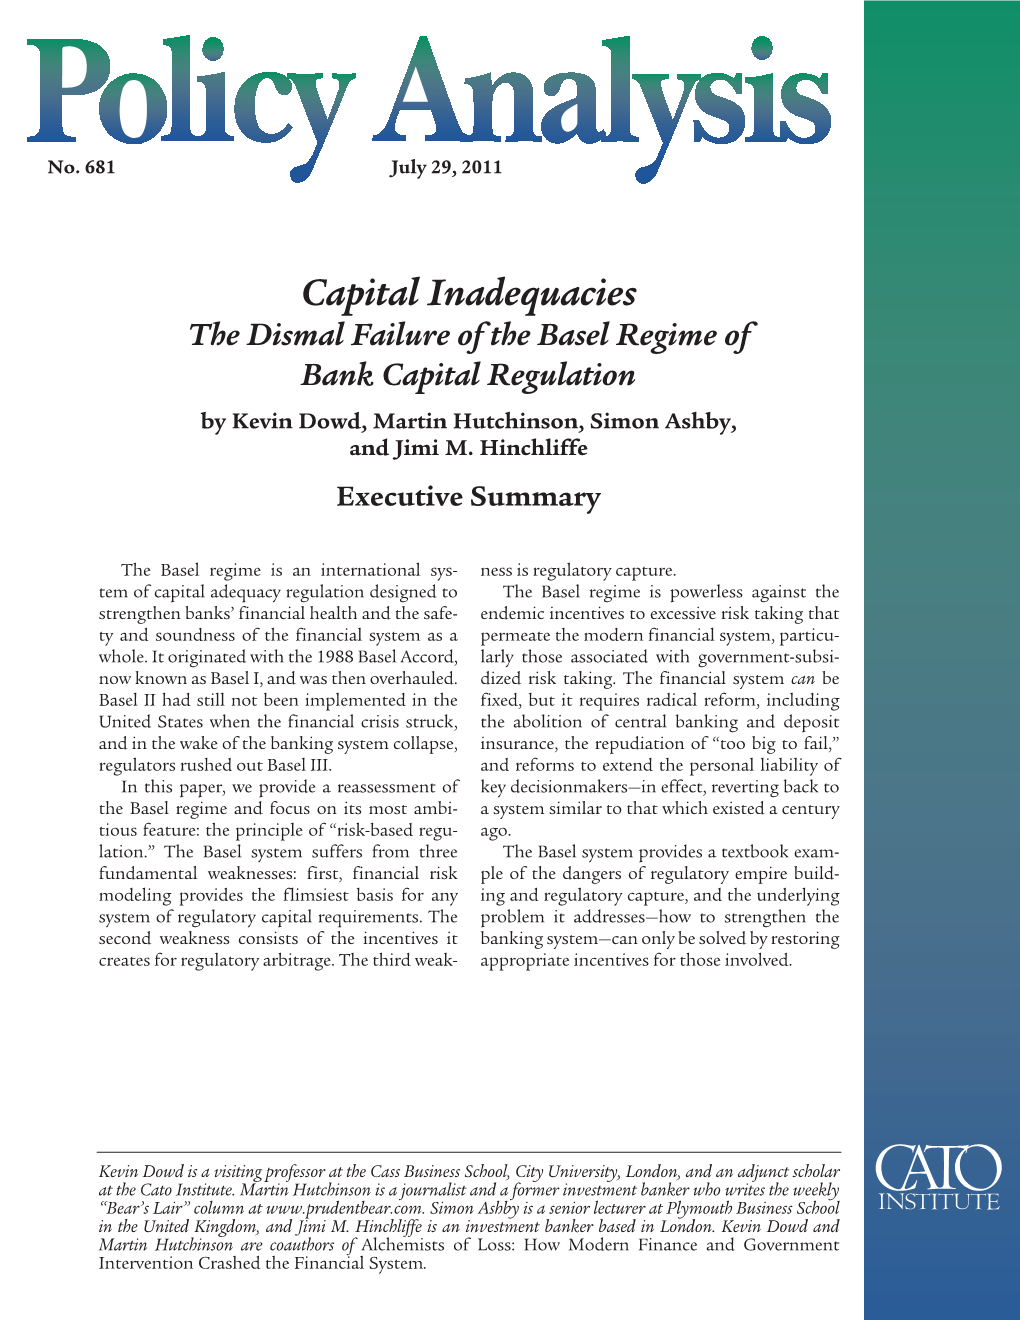 Capital Inadequacies the Dismal Failure of the Basel Regime of Bank Capital Regulation by Kevin Dowd, Martin Hutchinson, Simon Ashby, and Jimi M